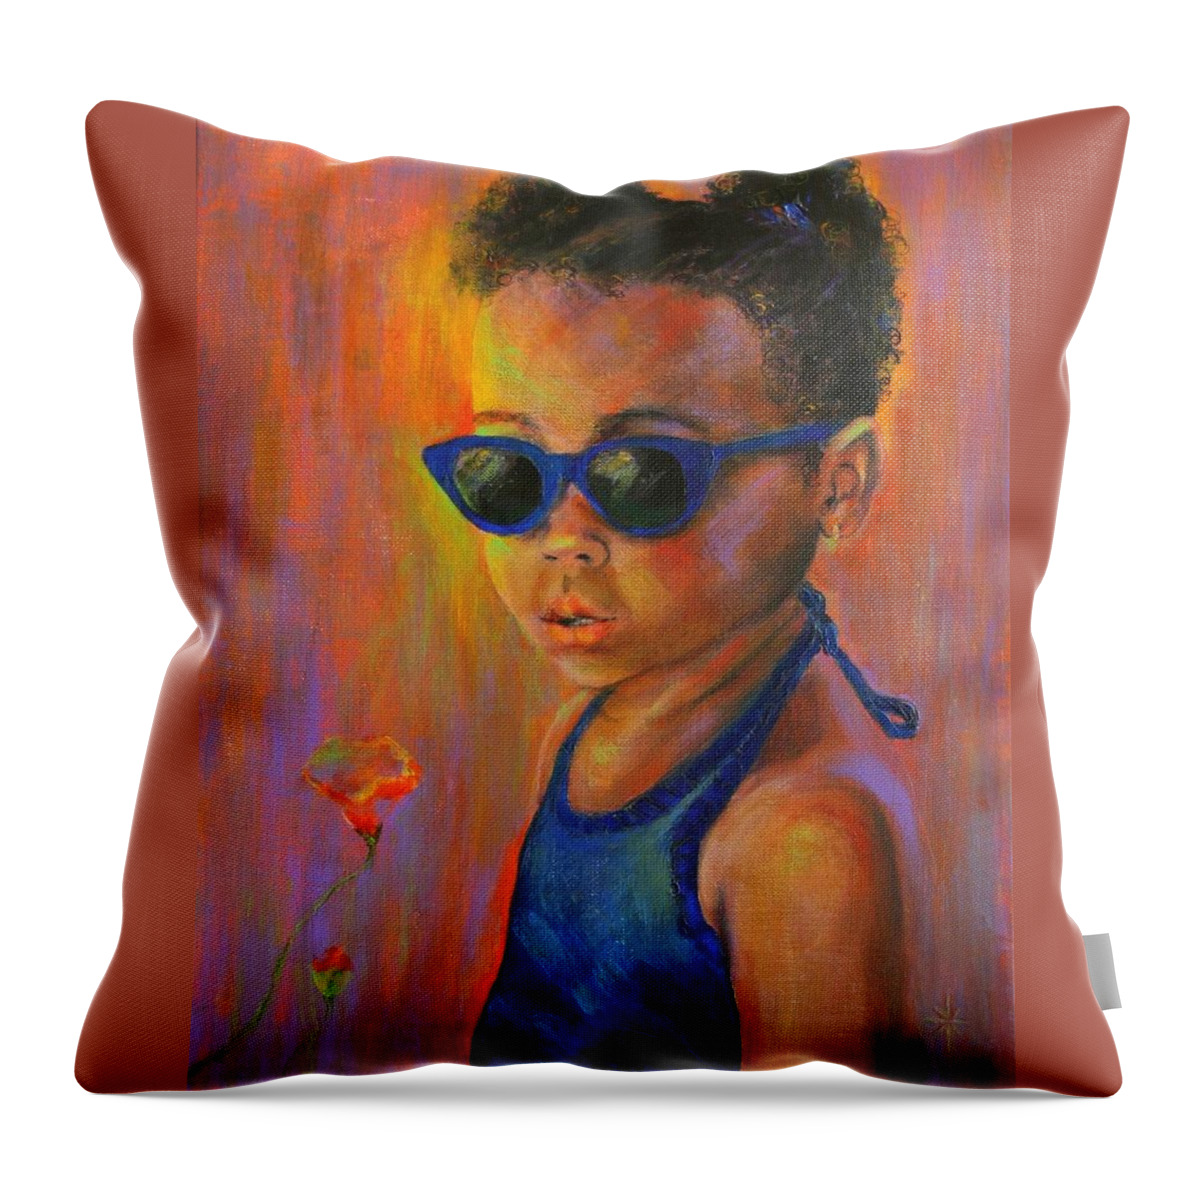 Child Throw Pillow featuring the painting The Bud And The Blossom by Jodie Marie Anne Richardson Traugott     aka jm-ART